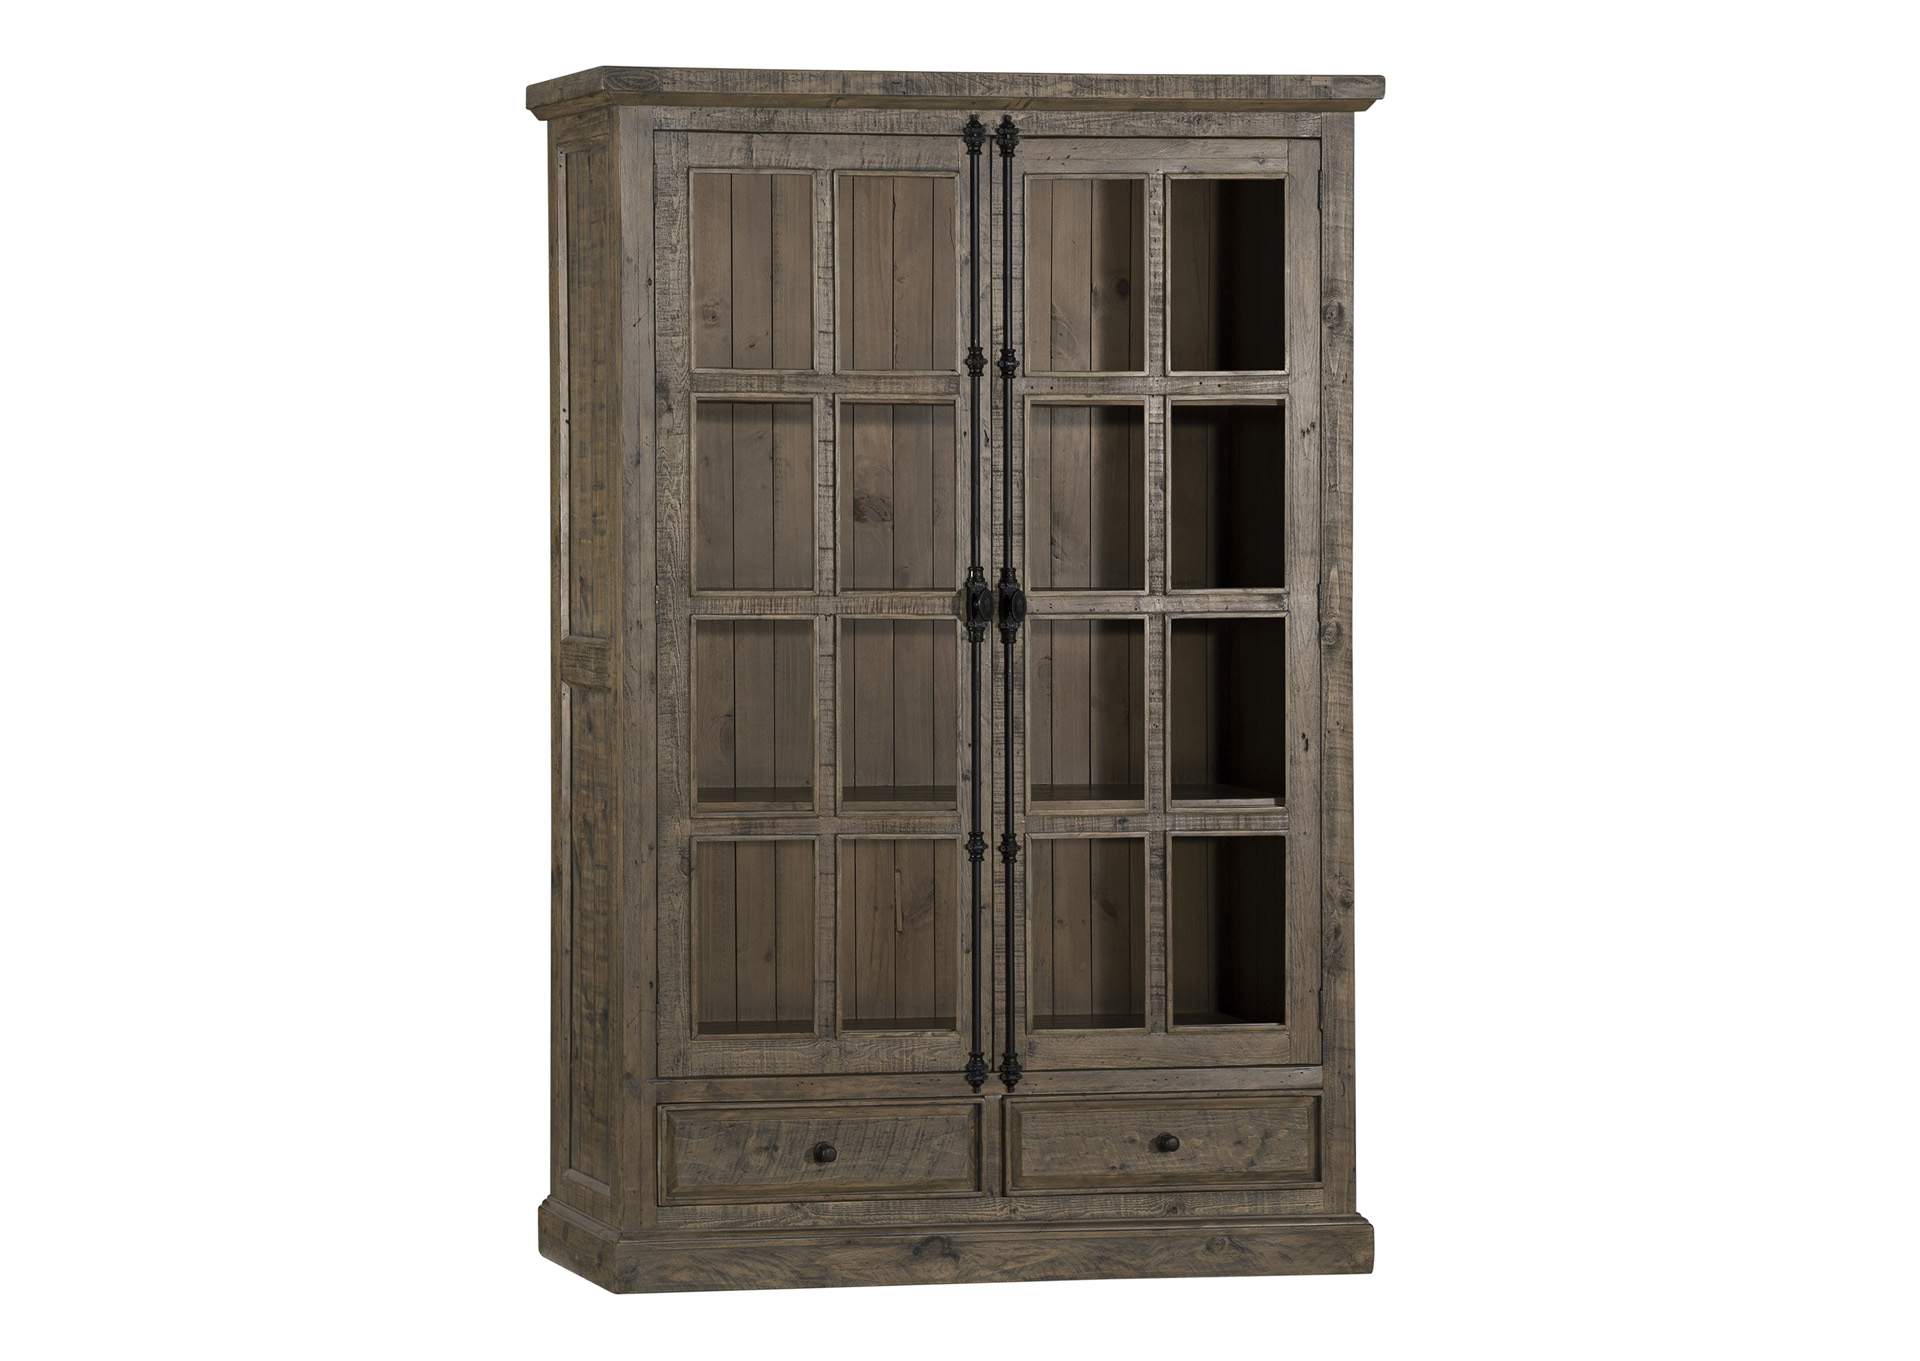 Tuscan Retreat Double Door Cabinet - Aged Gray Finish,Hillsdale